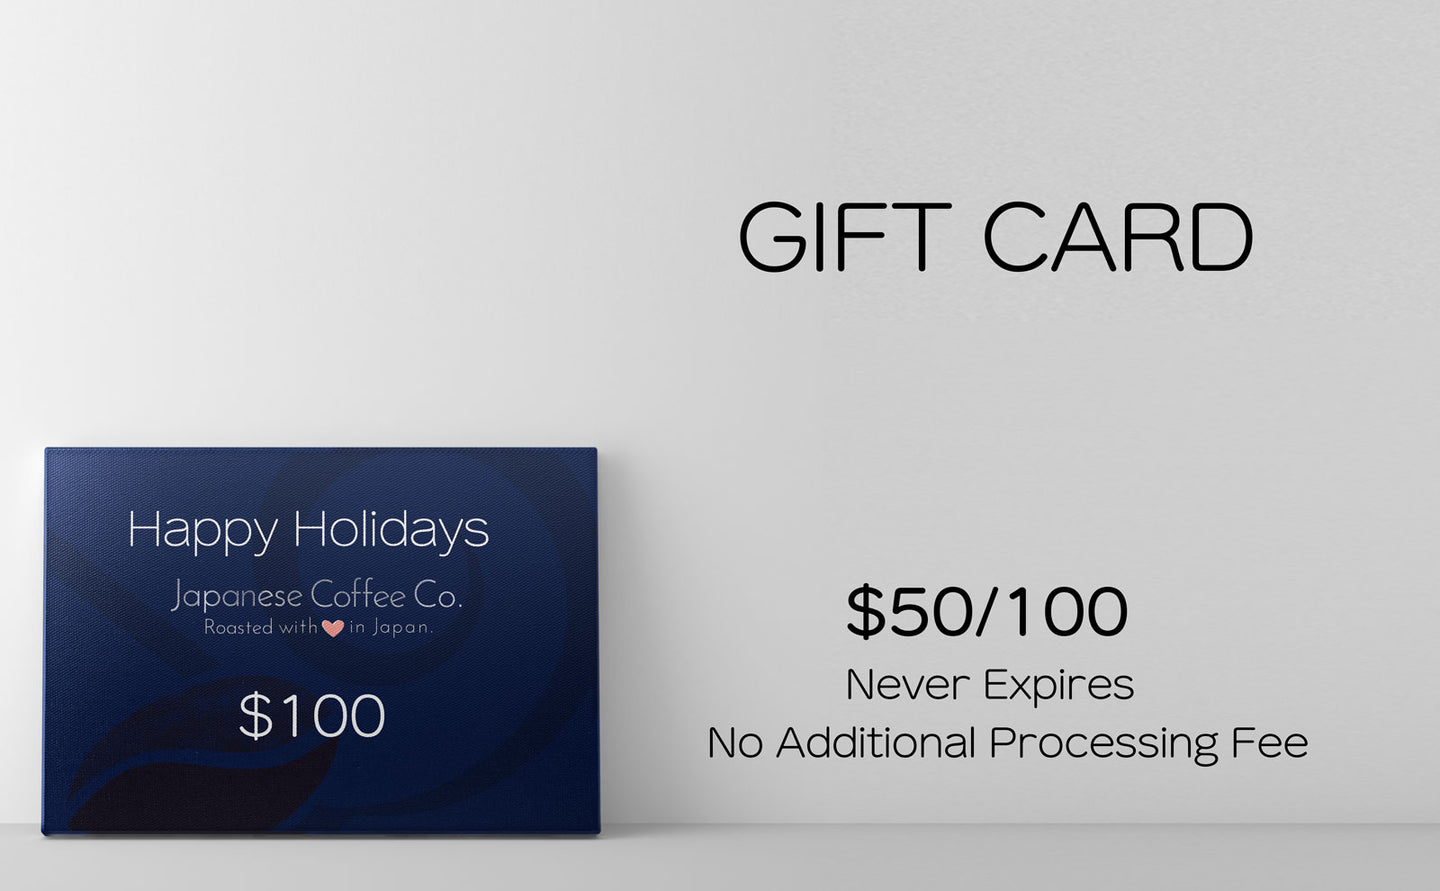 Japanese Coffee Co. Holiday Gift Cards - Never Expire